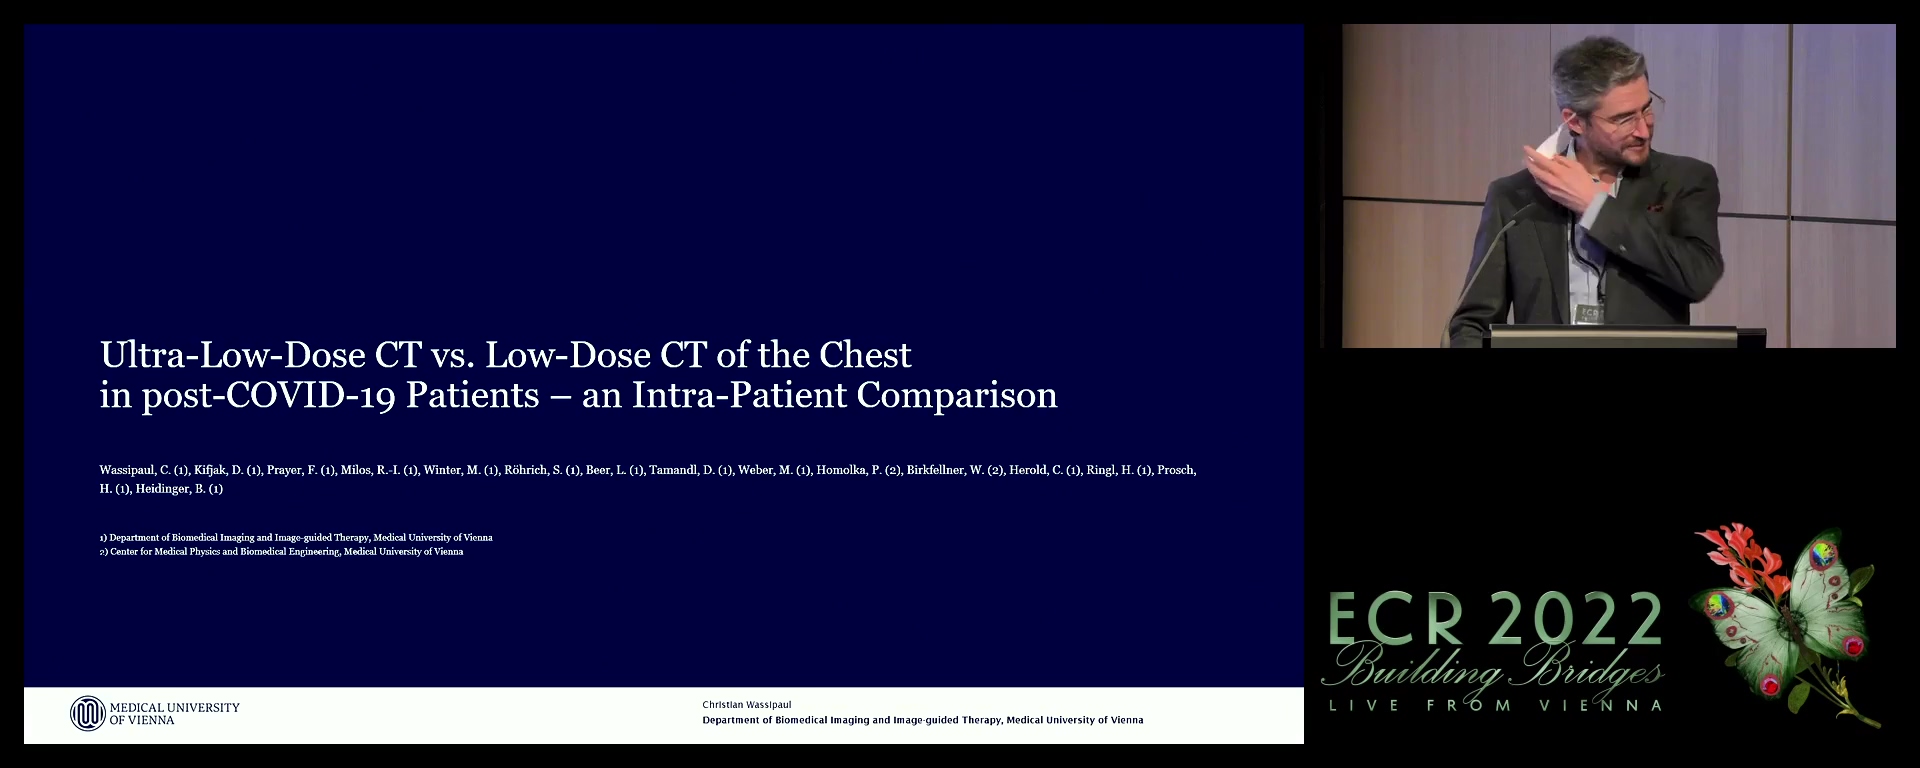 Ultra-low-dose CT (ULDCT) vs low-dose CT (LDCT) of the chest in post-COVID-19 patients: an intrapatient comparison